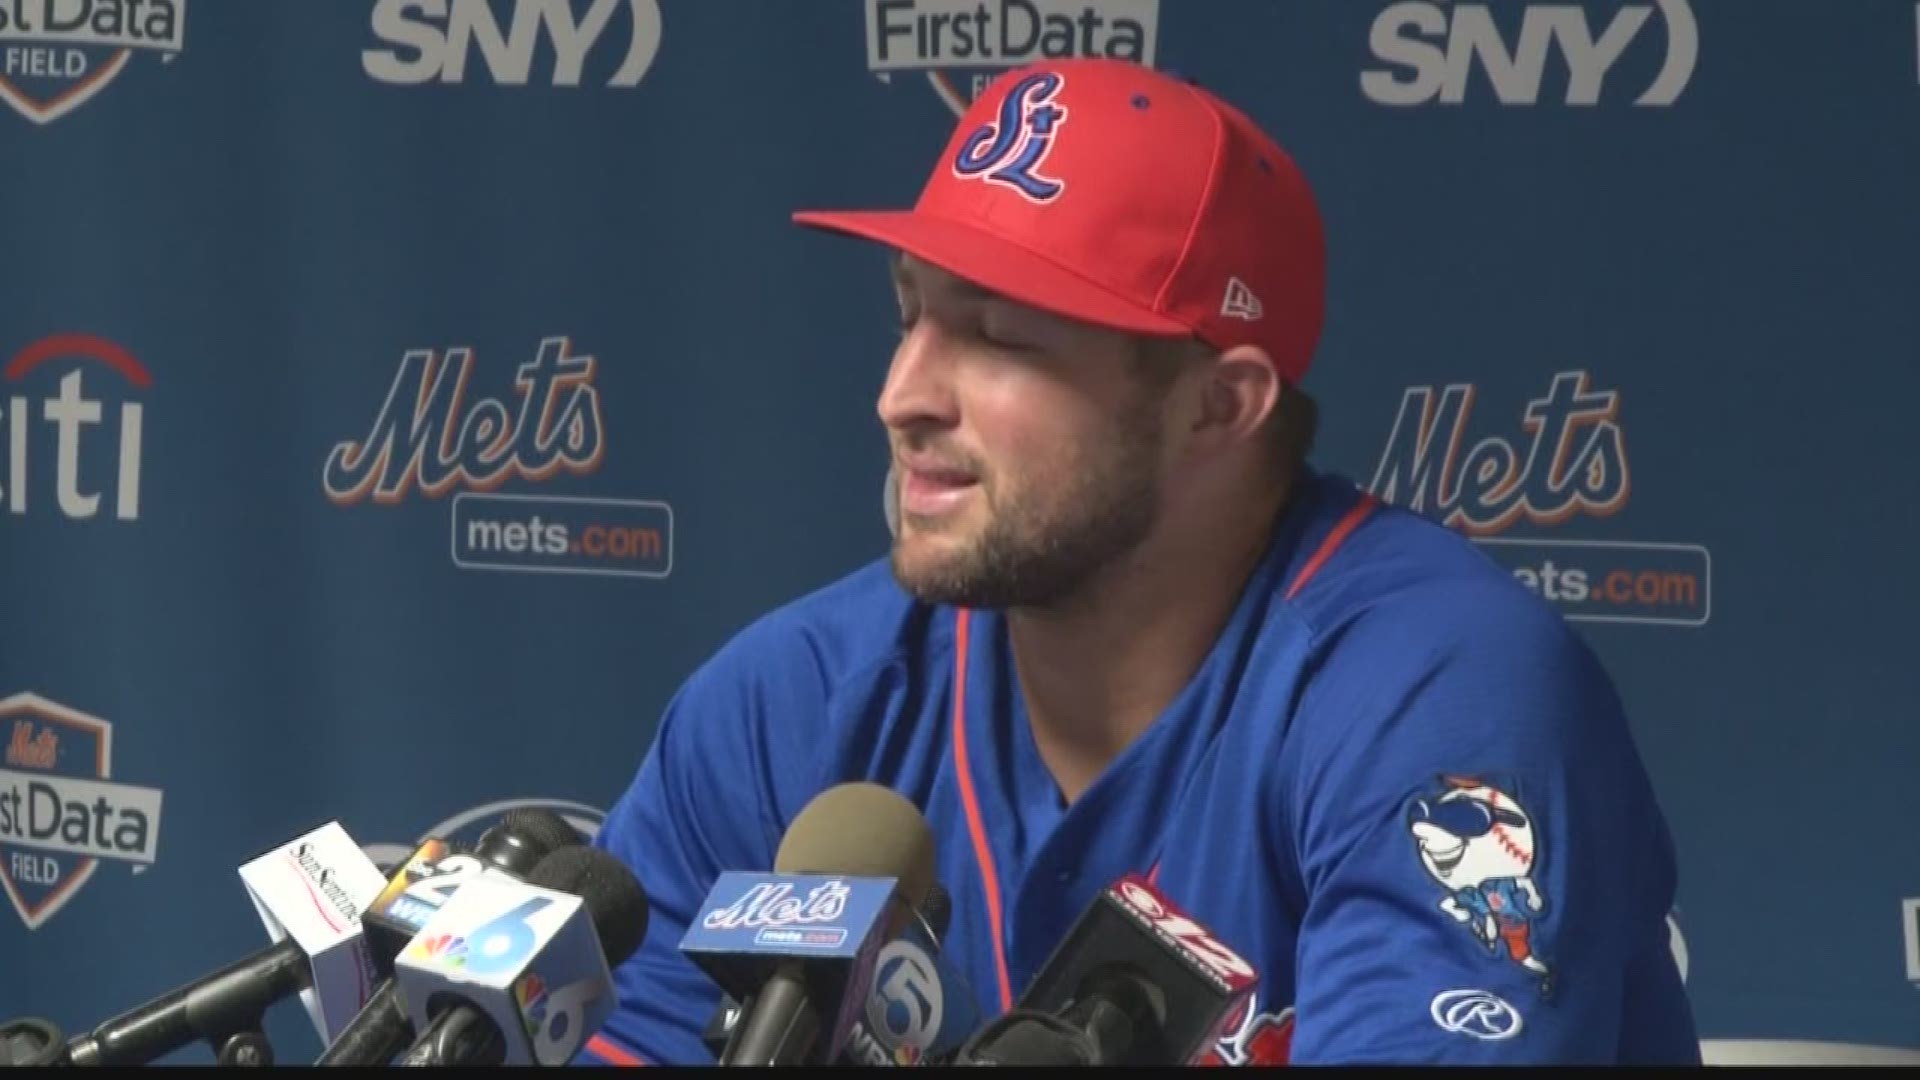 Jacksonville native Tim Tebow made his debut with the Port St. Lucie Mets on Tuesday.